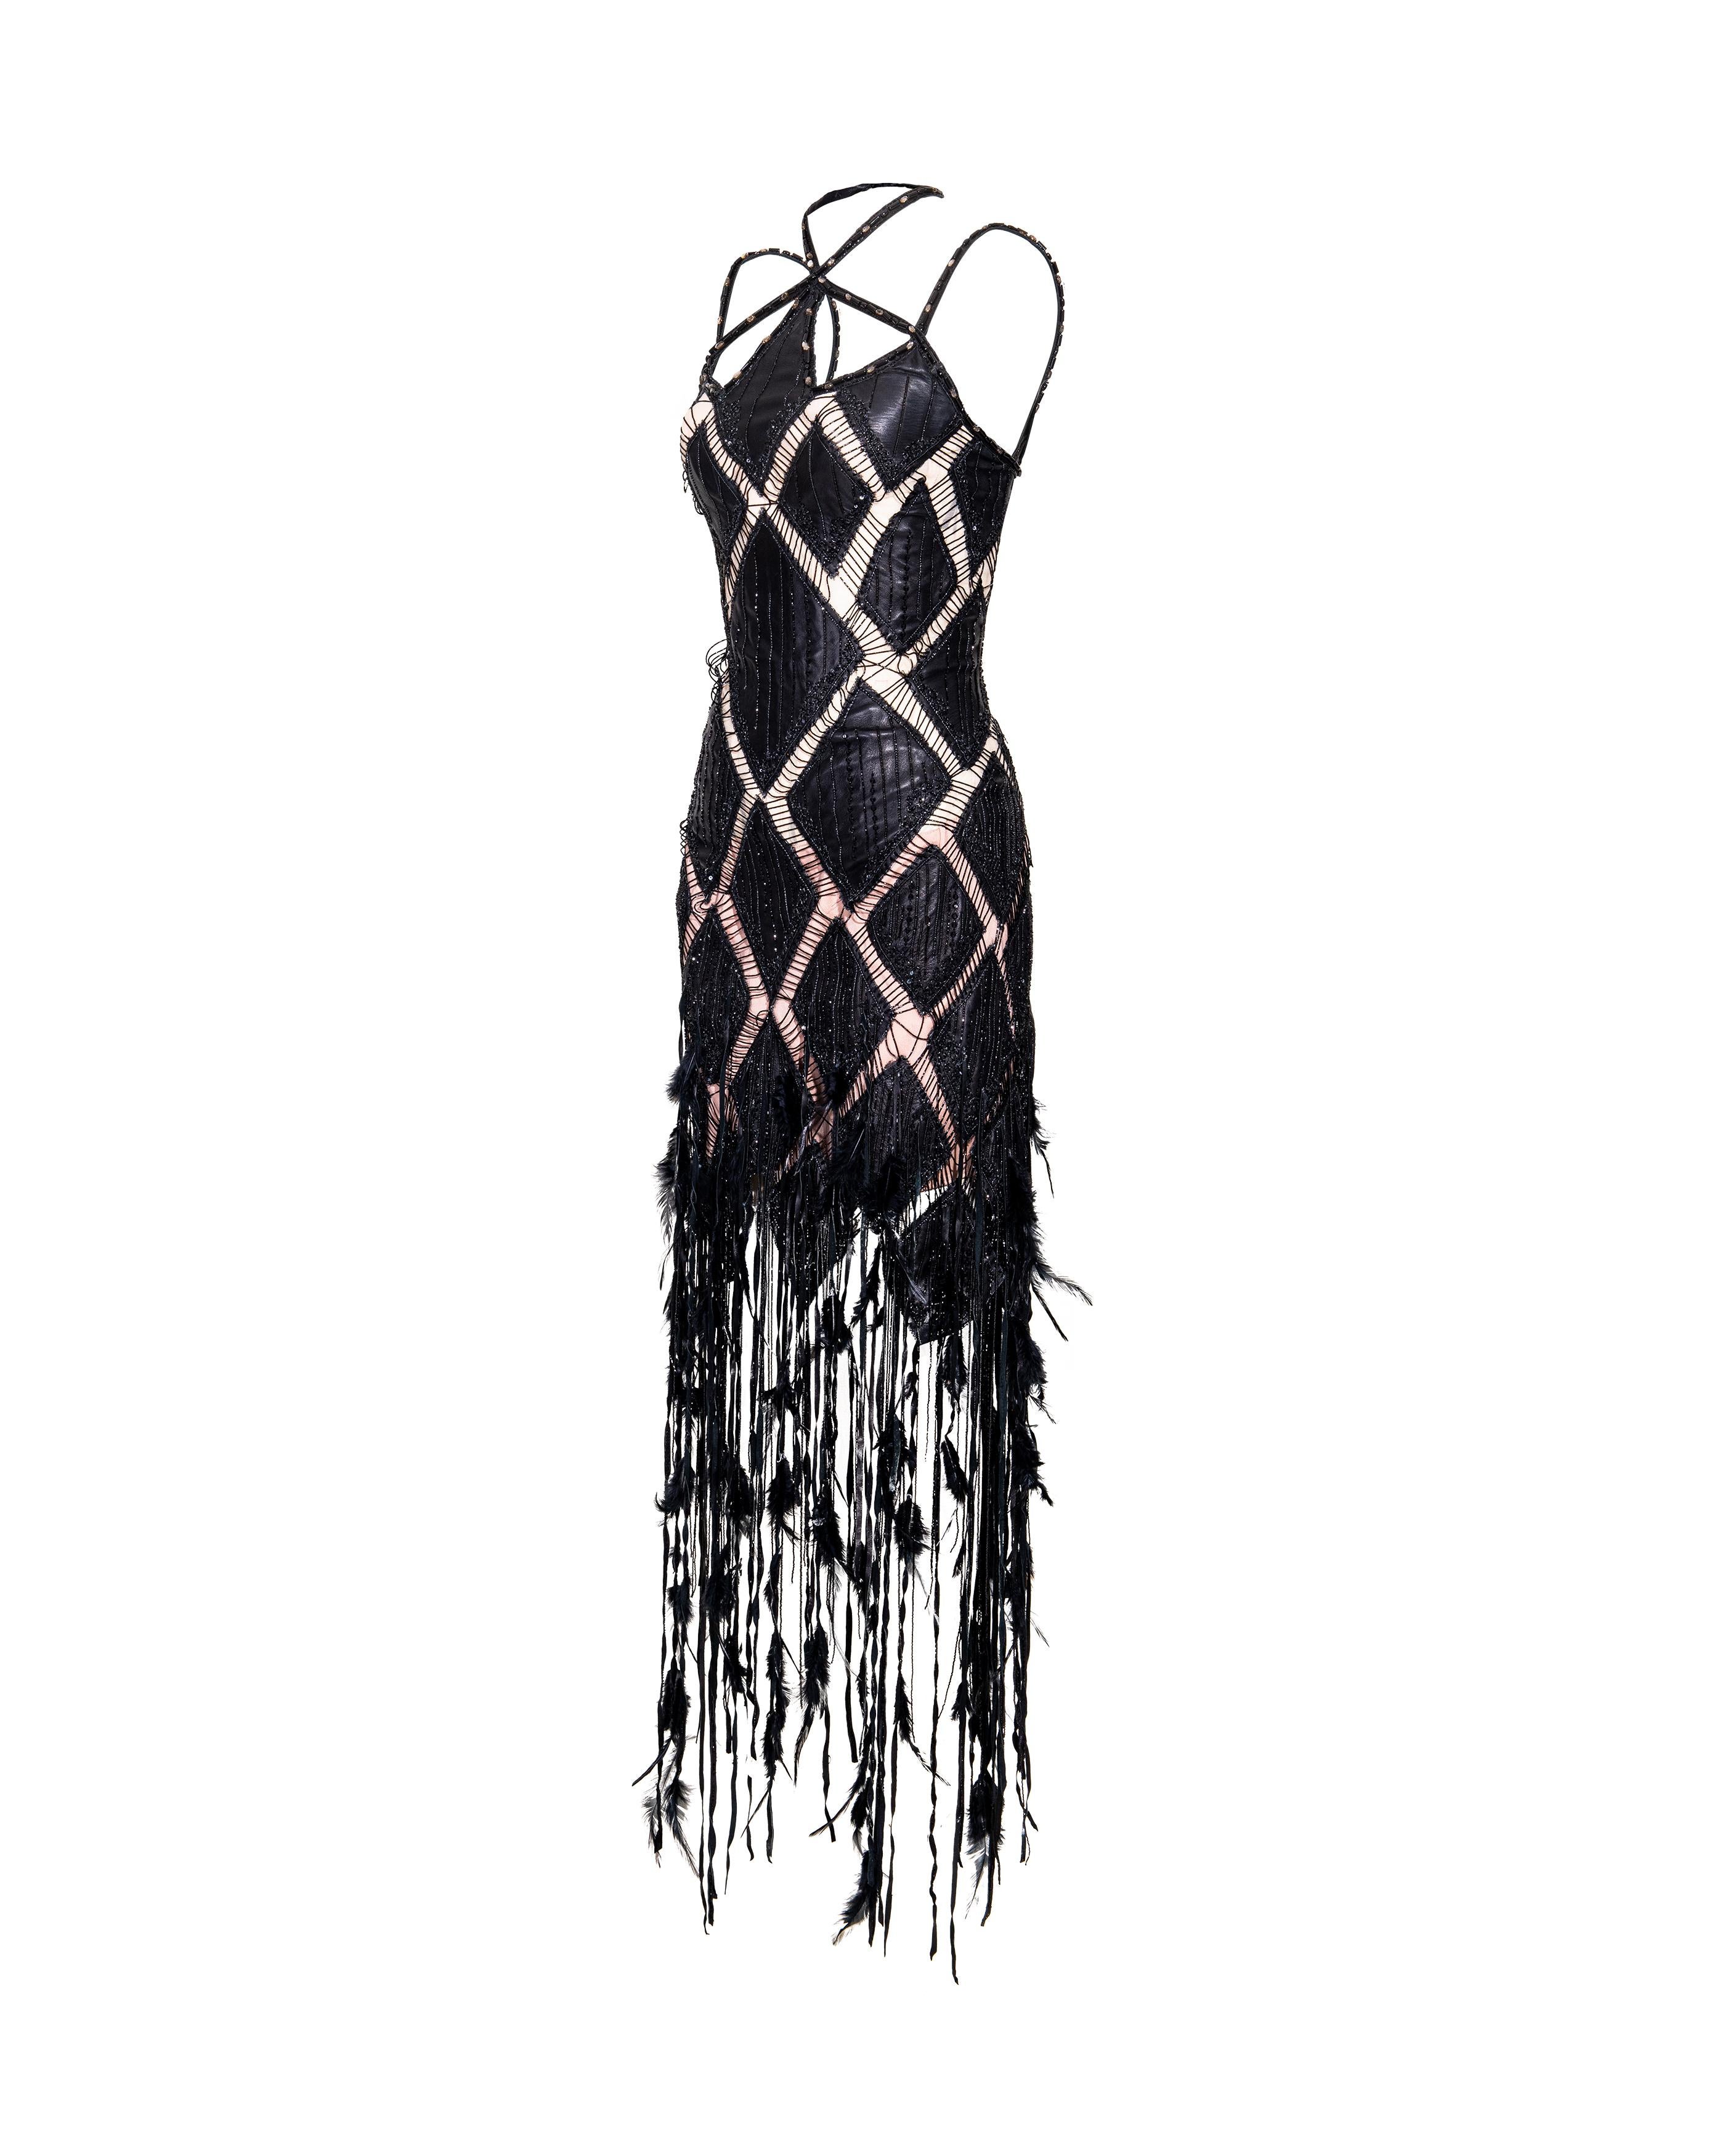 S/S 2004 Roberto Cavalli Geometric Black Embellished Leather Corset Fringe Dress In Good Condition In North Hollywood, CA